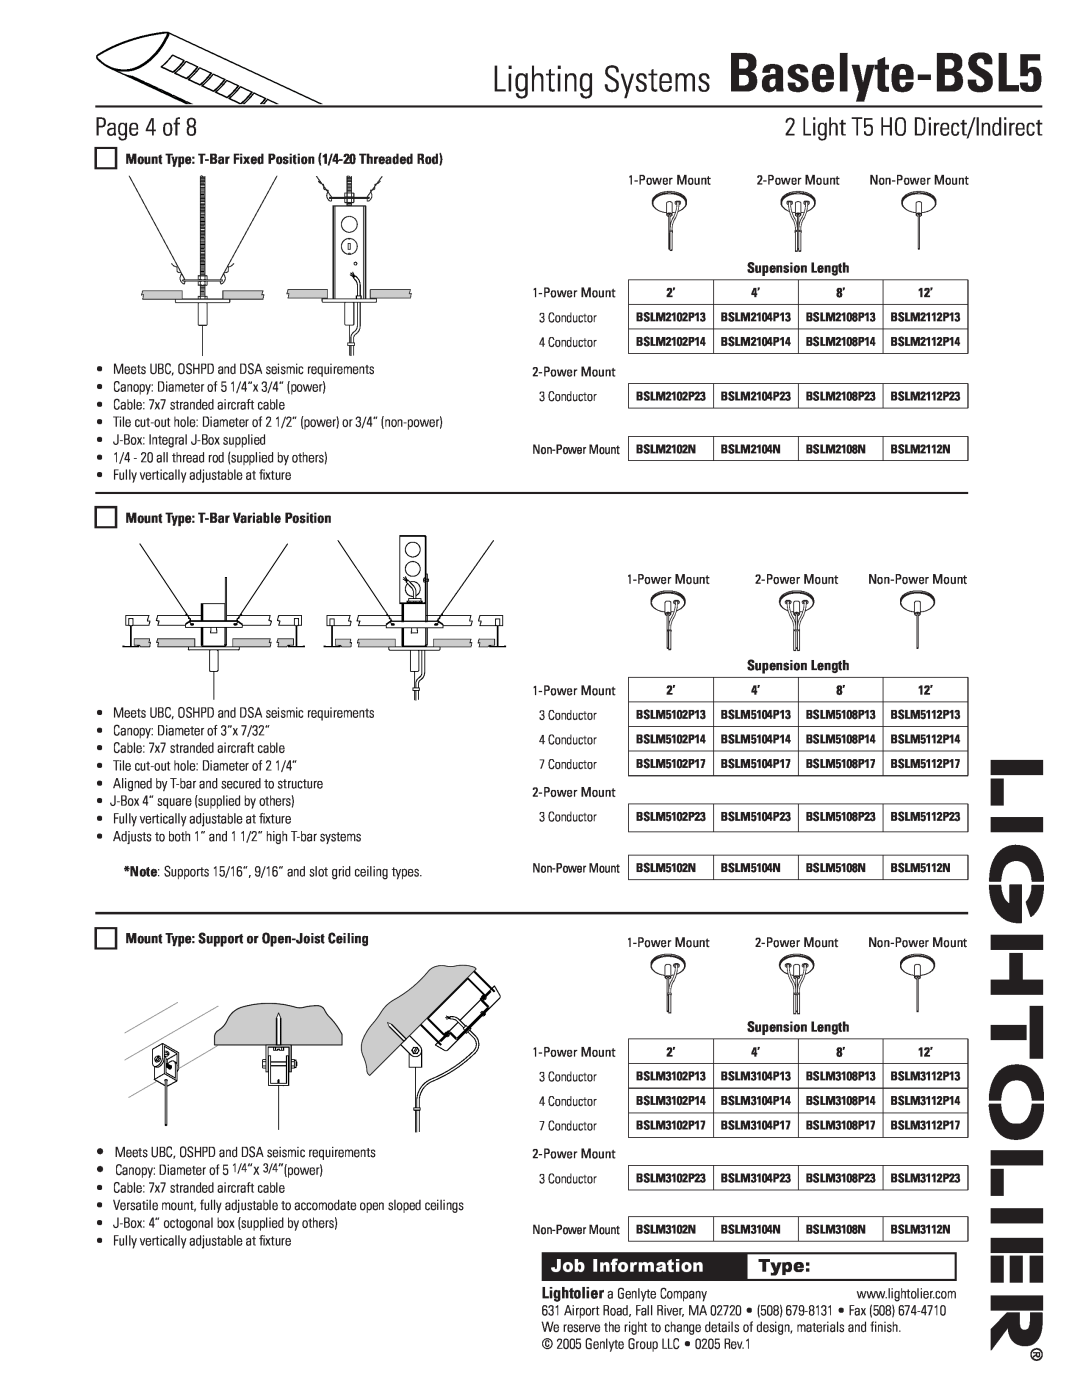 Lightolier Baselyte-BSL5 specifications Mount Type T-BarVariable Position, Mount Type Support or Open-JoistCeiling, Page of 